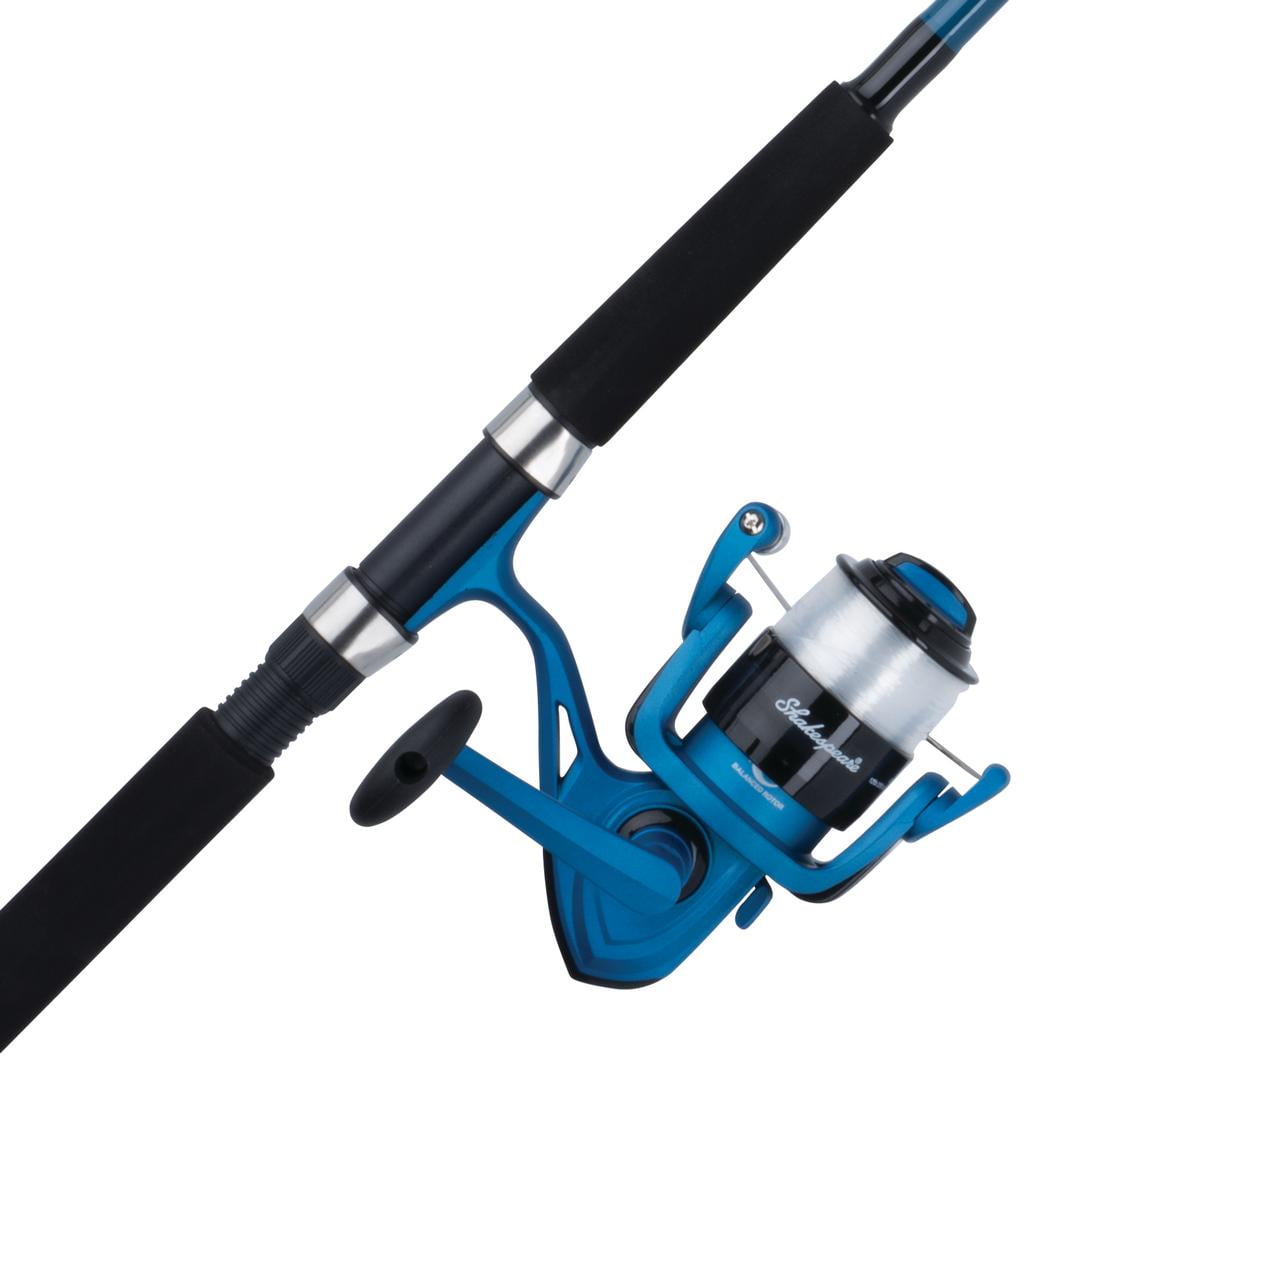 Shakespeare Alpha Medium 6 Low Profile 6' 04fishing Rod and Bait Cast Reel Combo for sale online 